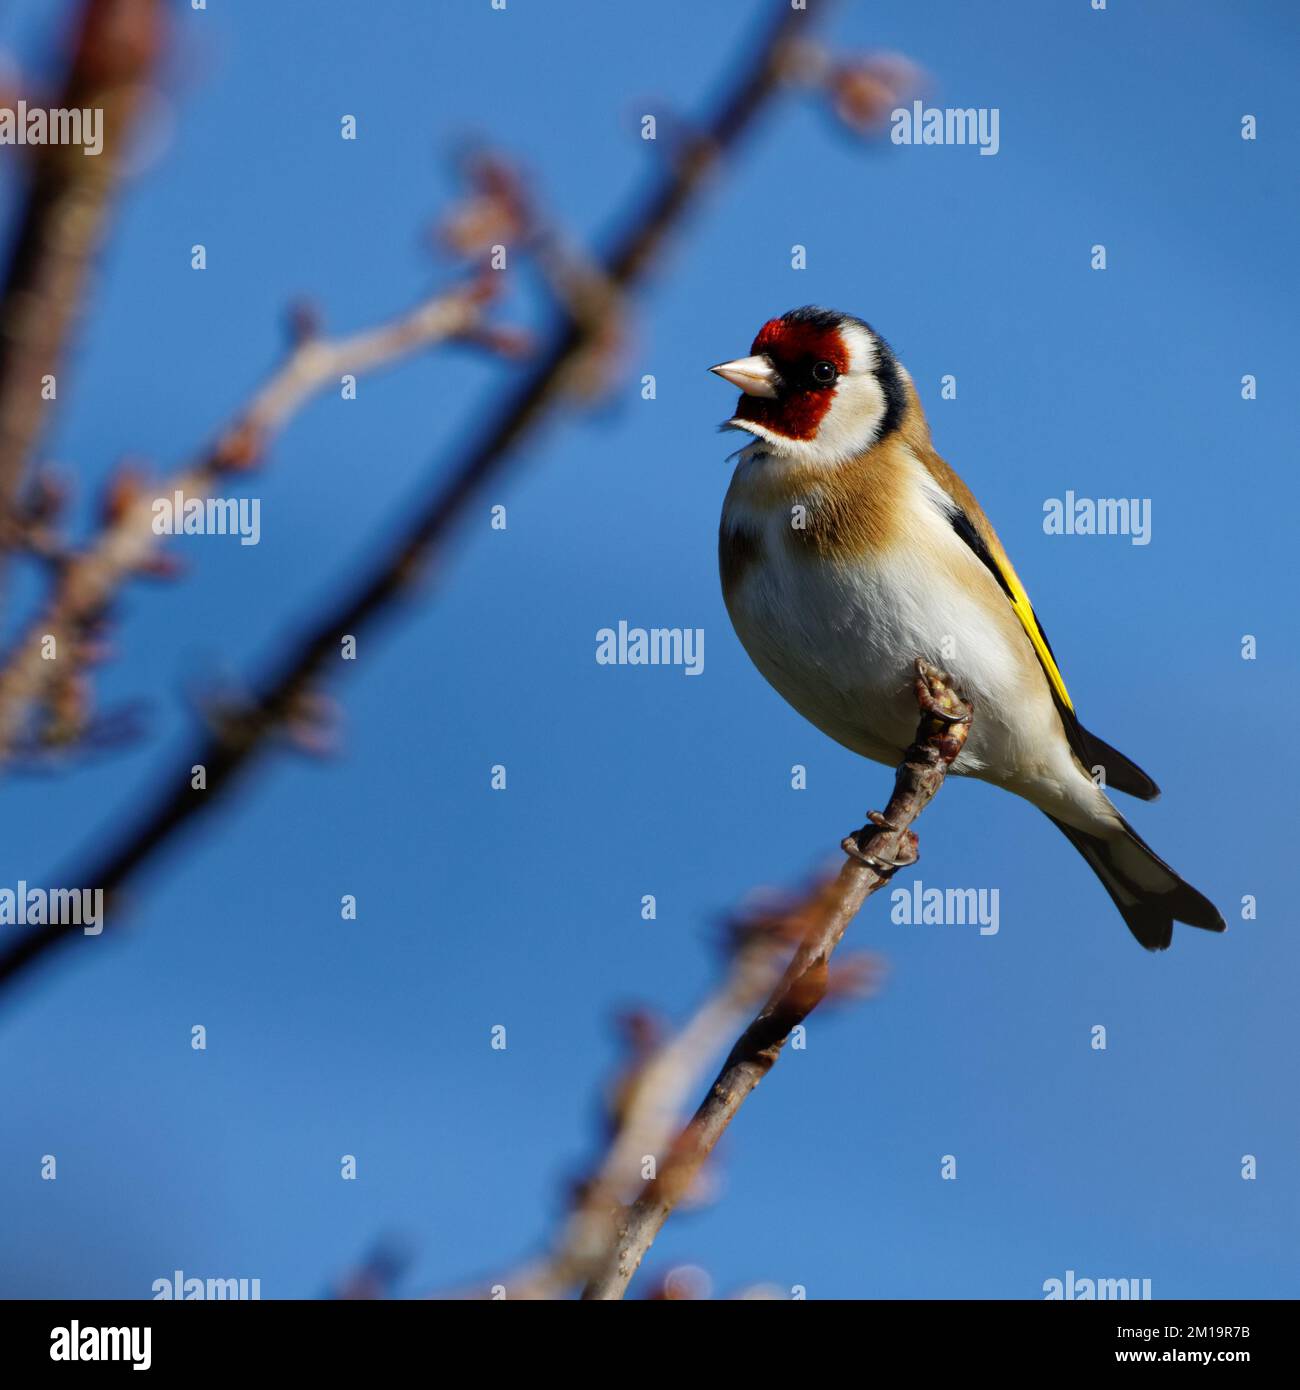 European Goldfinch perched on tip of a branch against a blue sky background Stock Photo